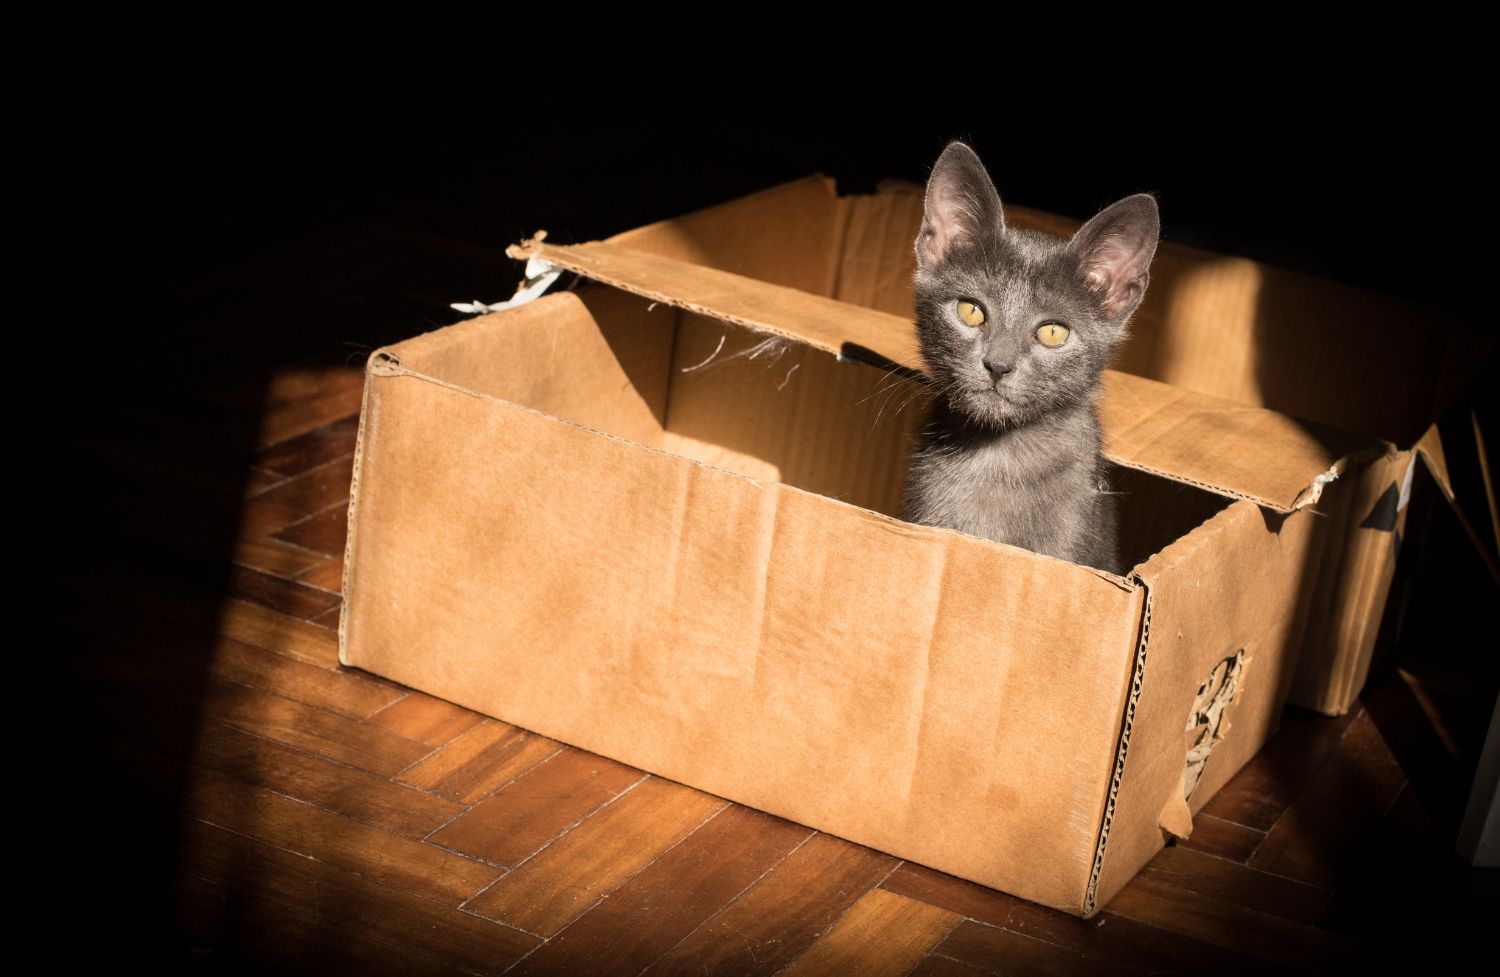 Dark grey cat sitting in open rectangular cardboard box with its head poking out the top.